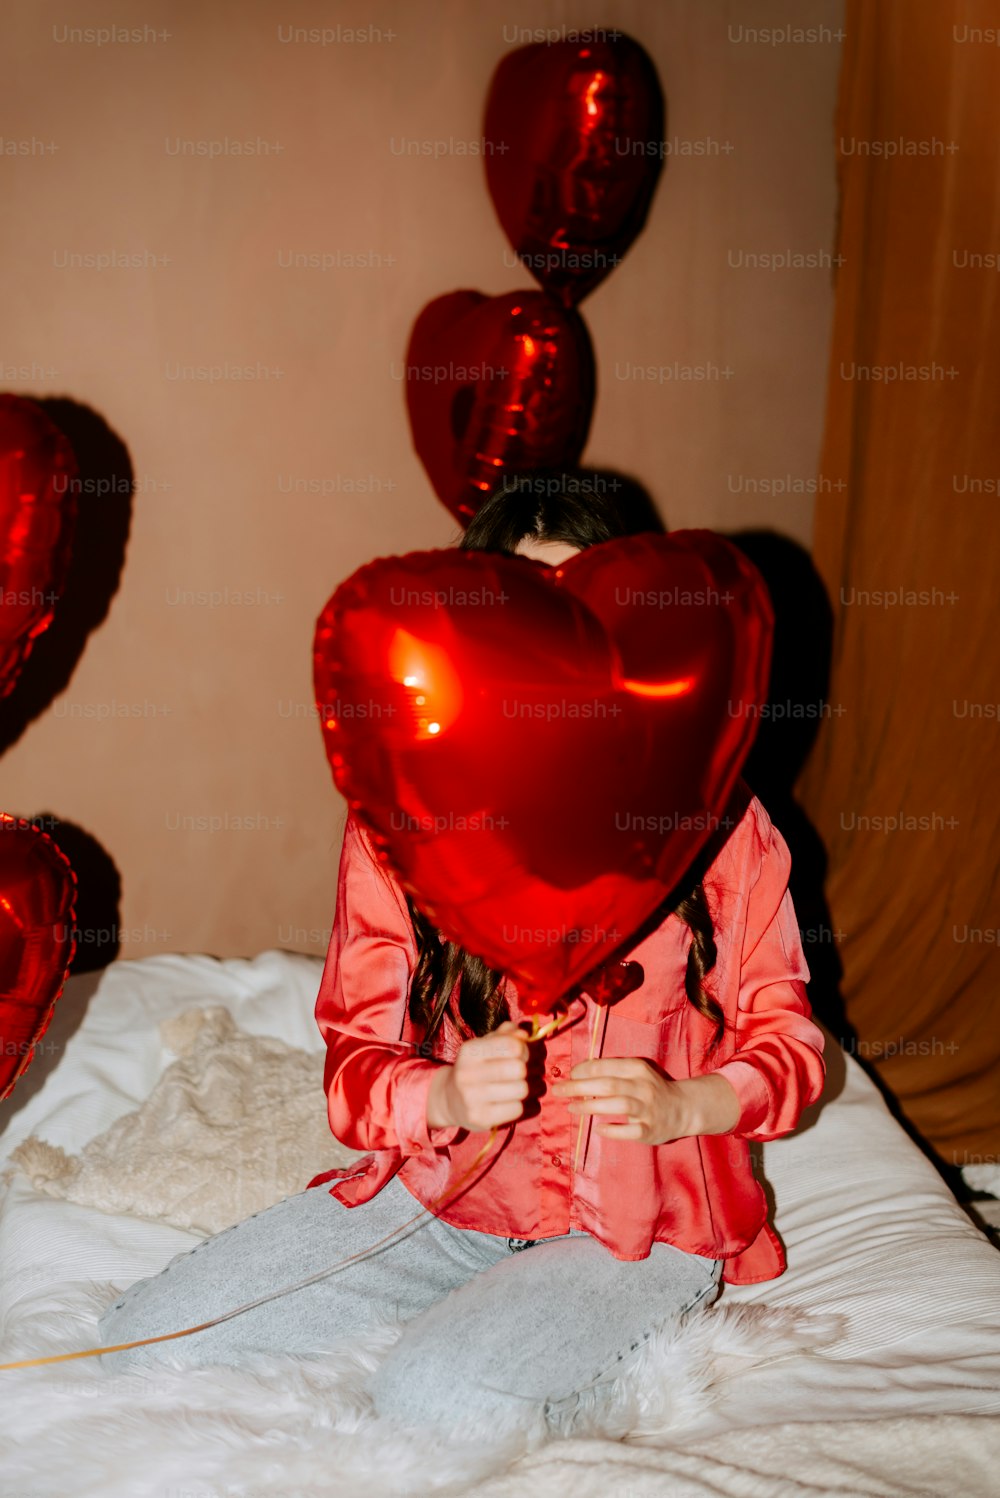 a little girl sitting on a bed holding a heart shaped balloon